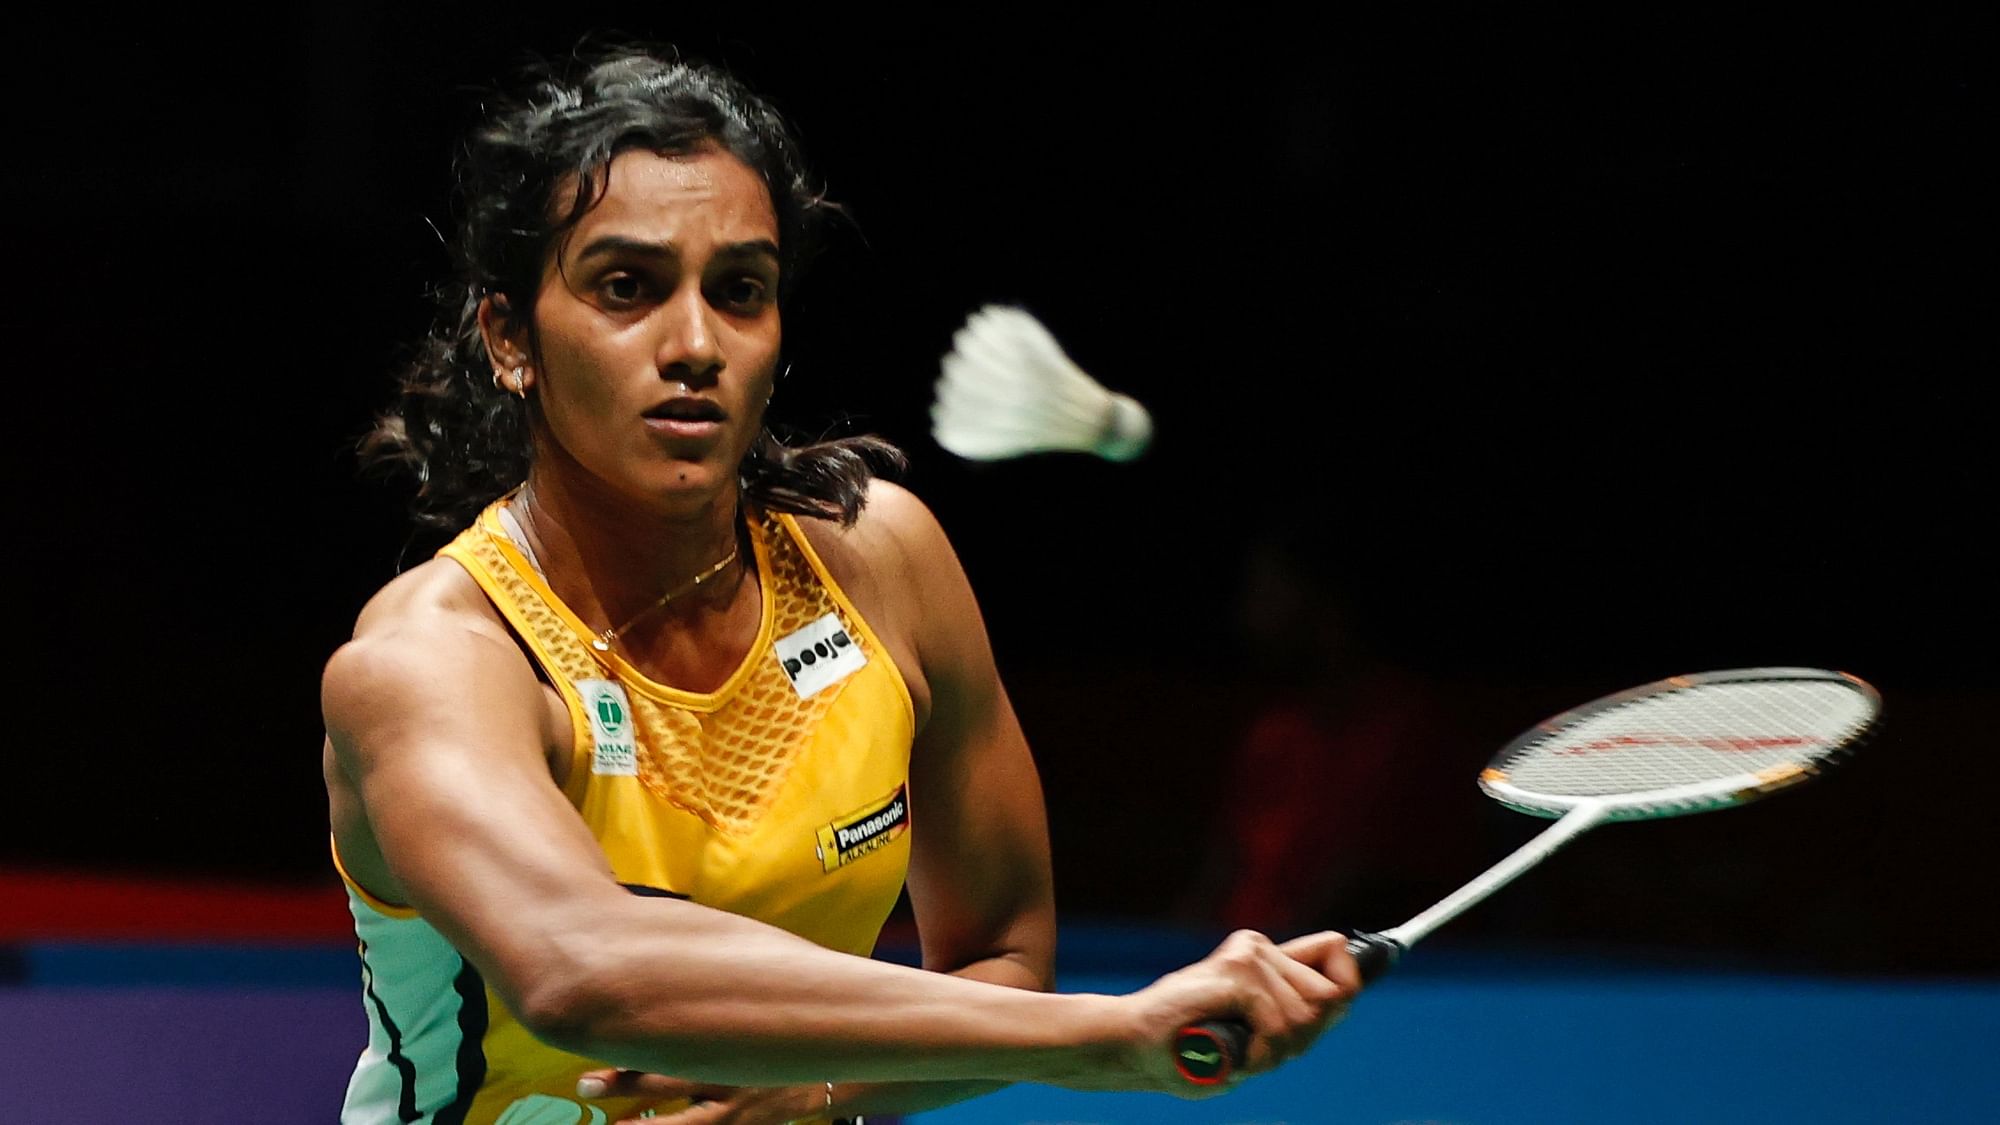 PV Sindhu Chases Elusive All England Open Title in Depleted Field